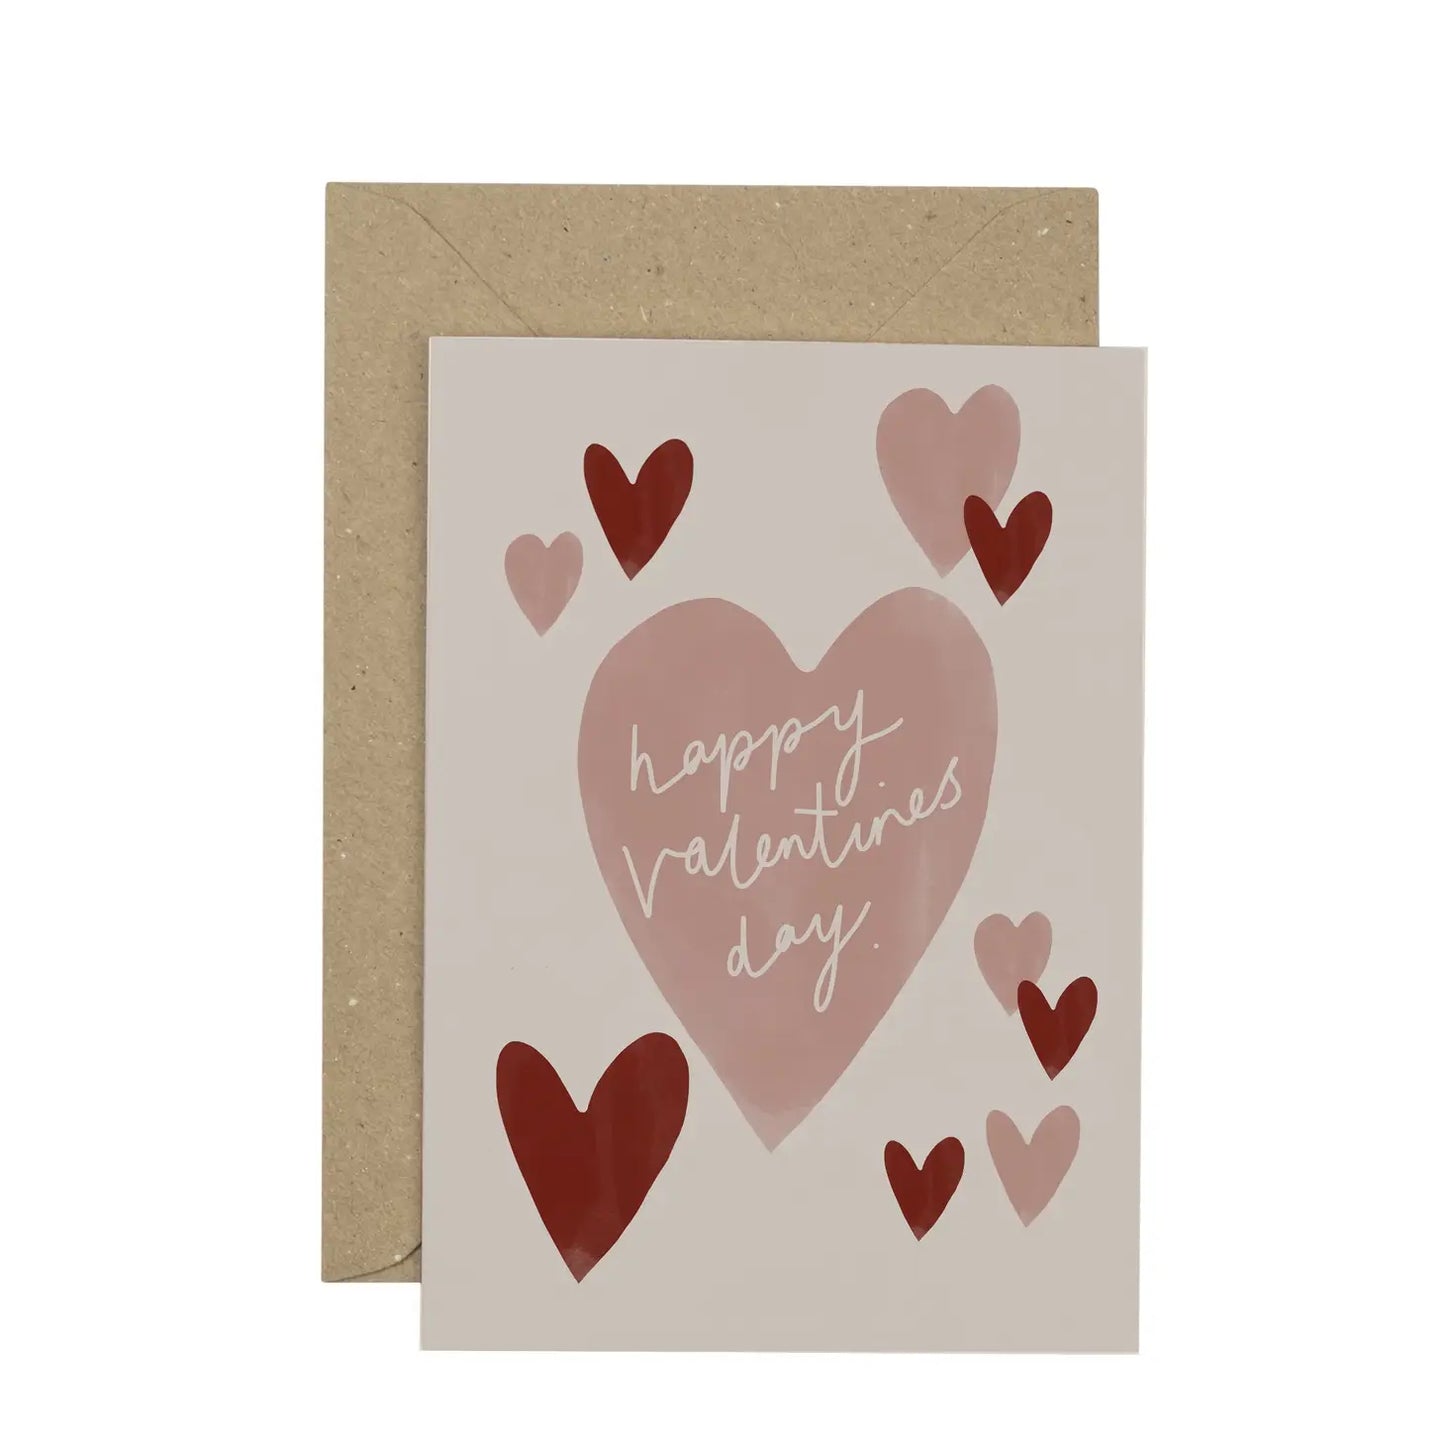 'Happy Valentines Day' greetings card - THE BRISTOL ARTISAN